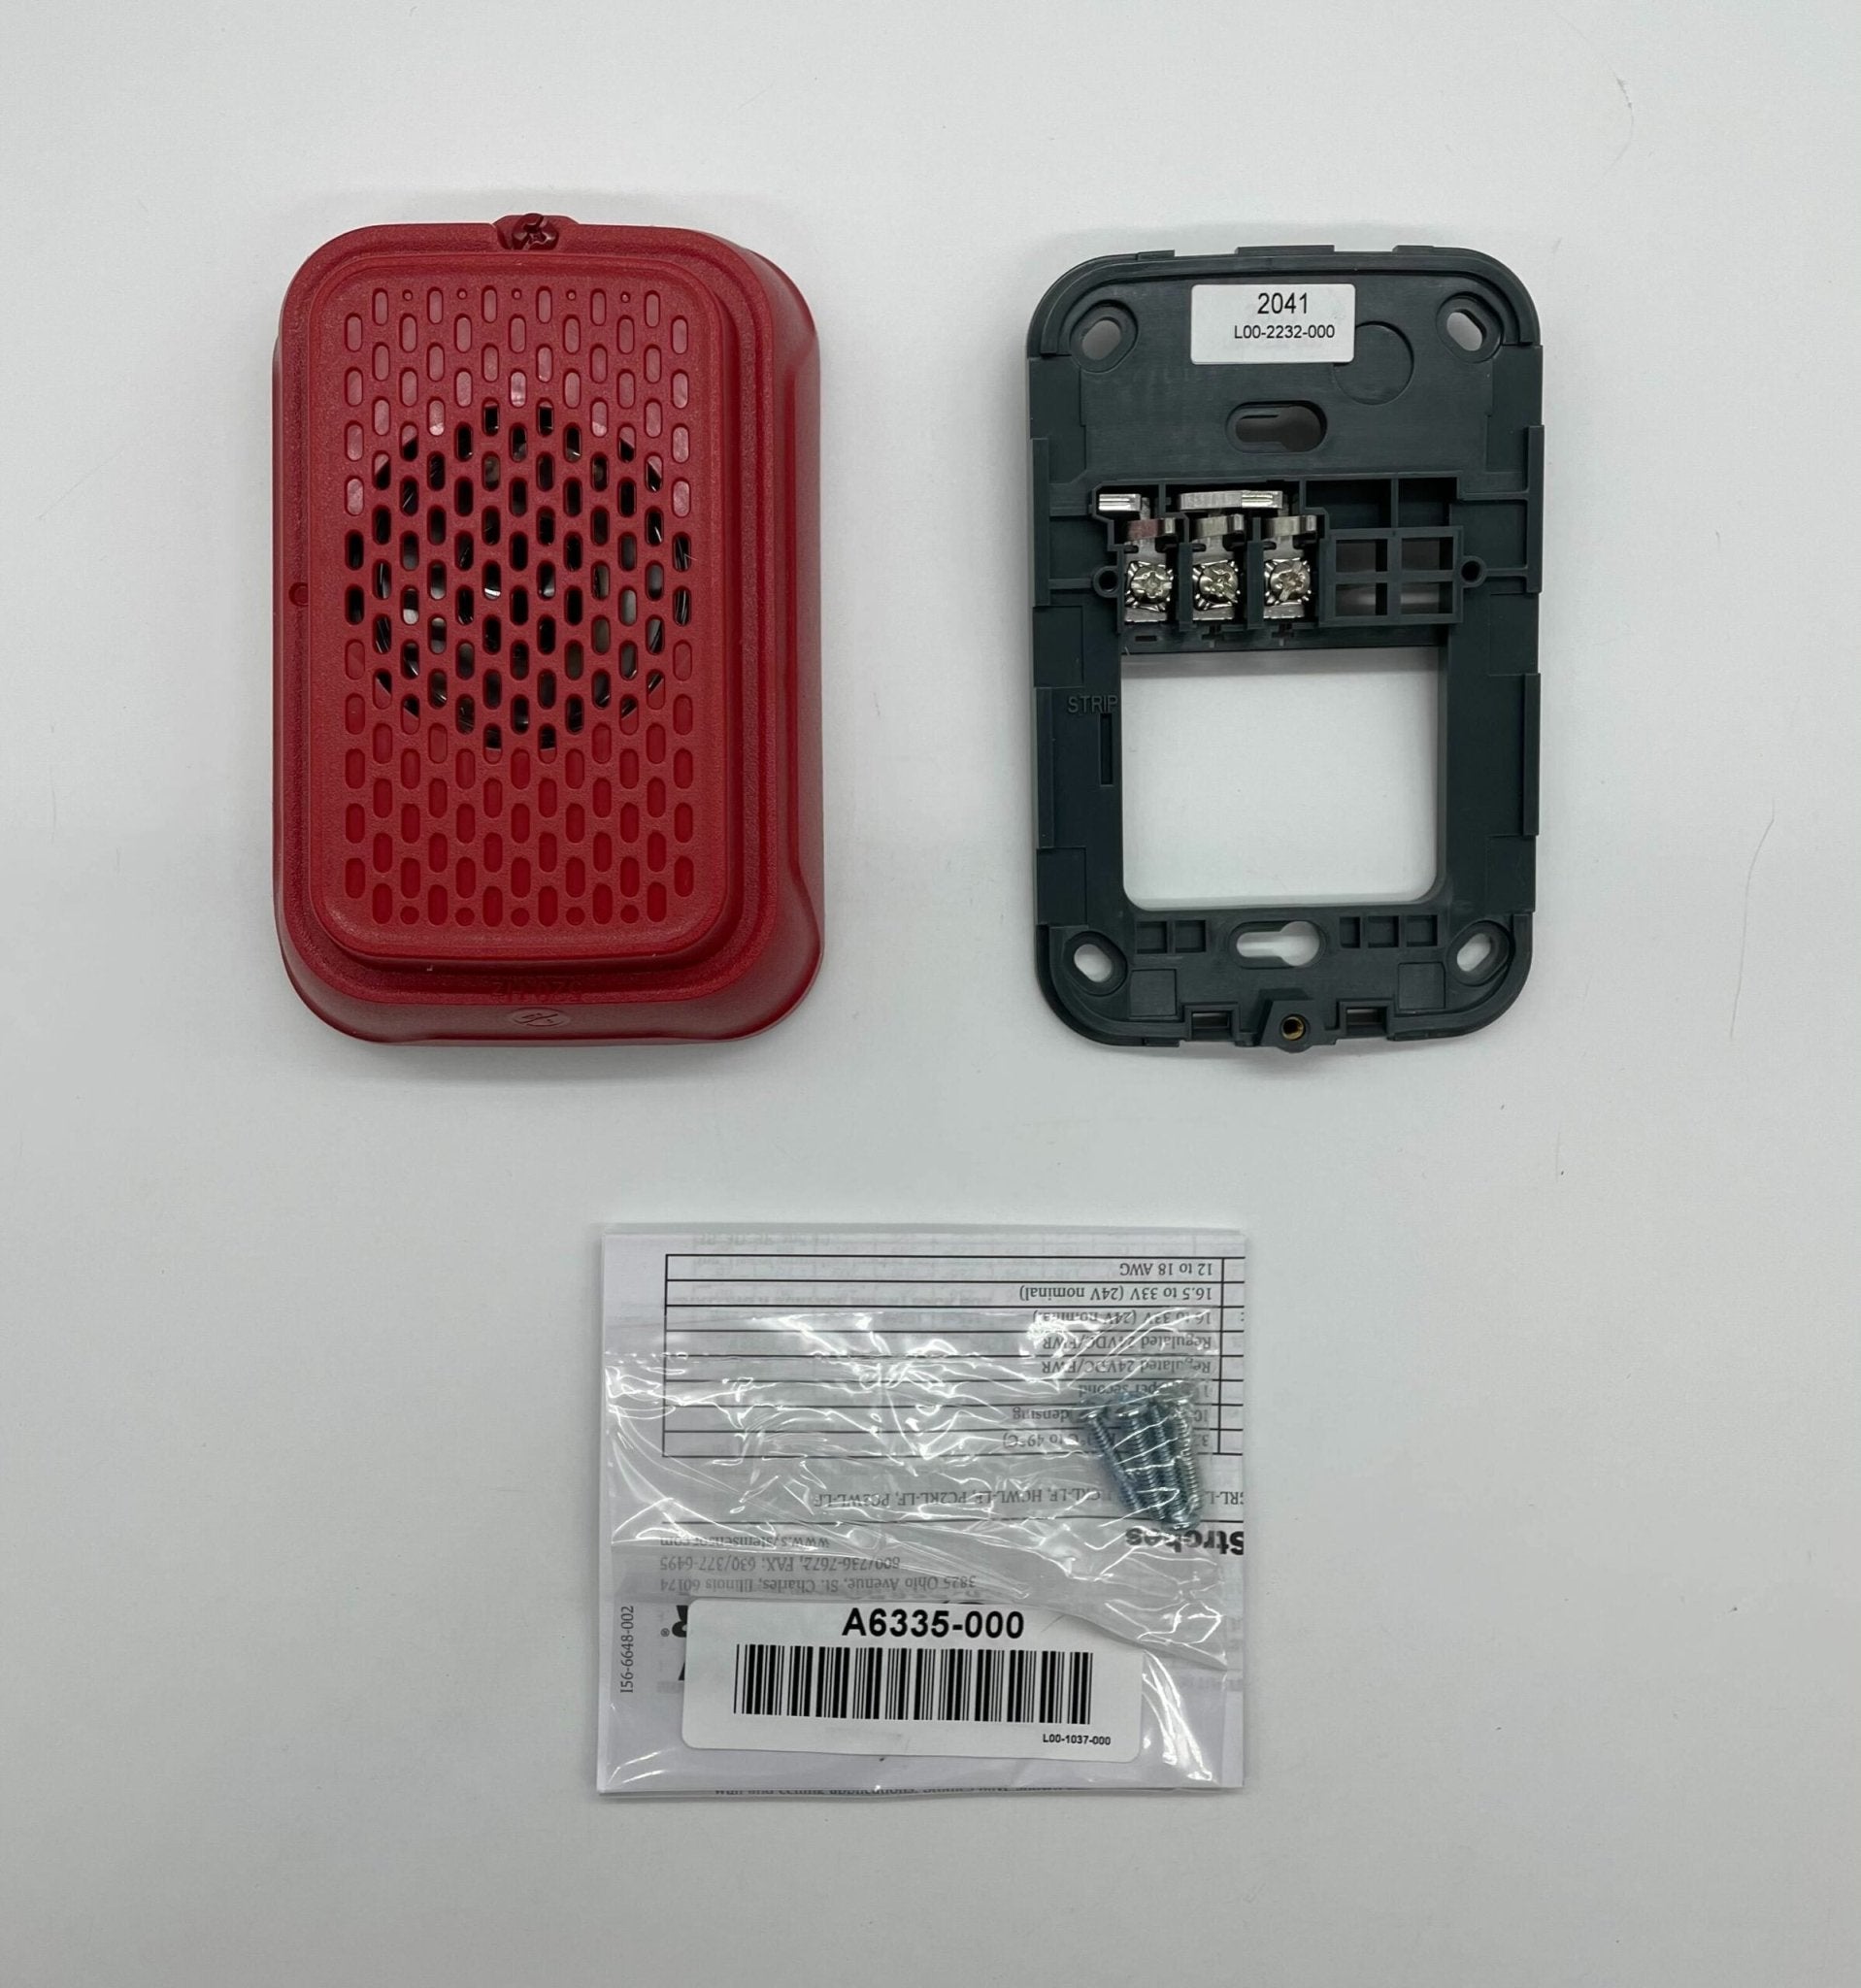 System Sensor HGRL-LF Low Frequency Compact Sounder - The Fire Alarm Supplier